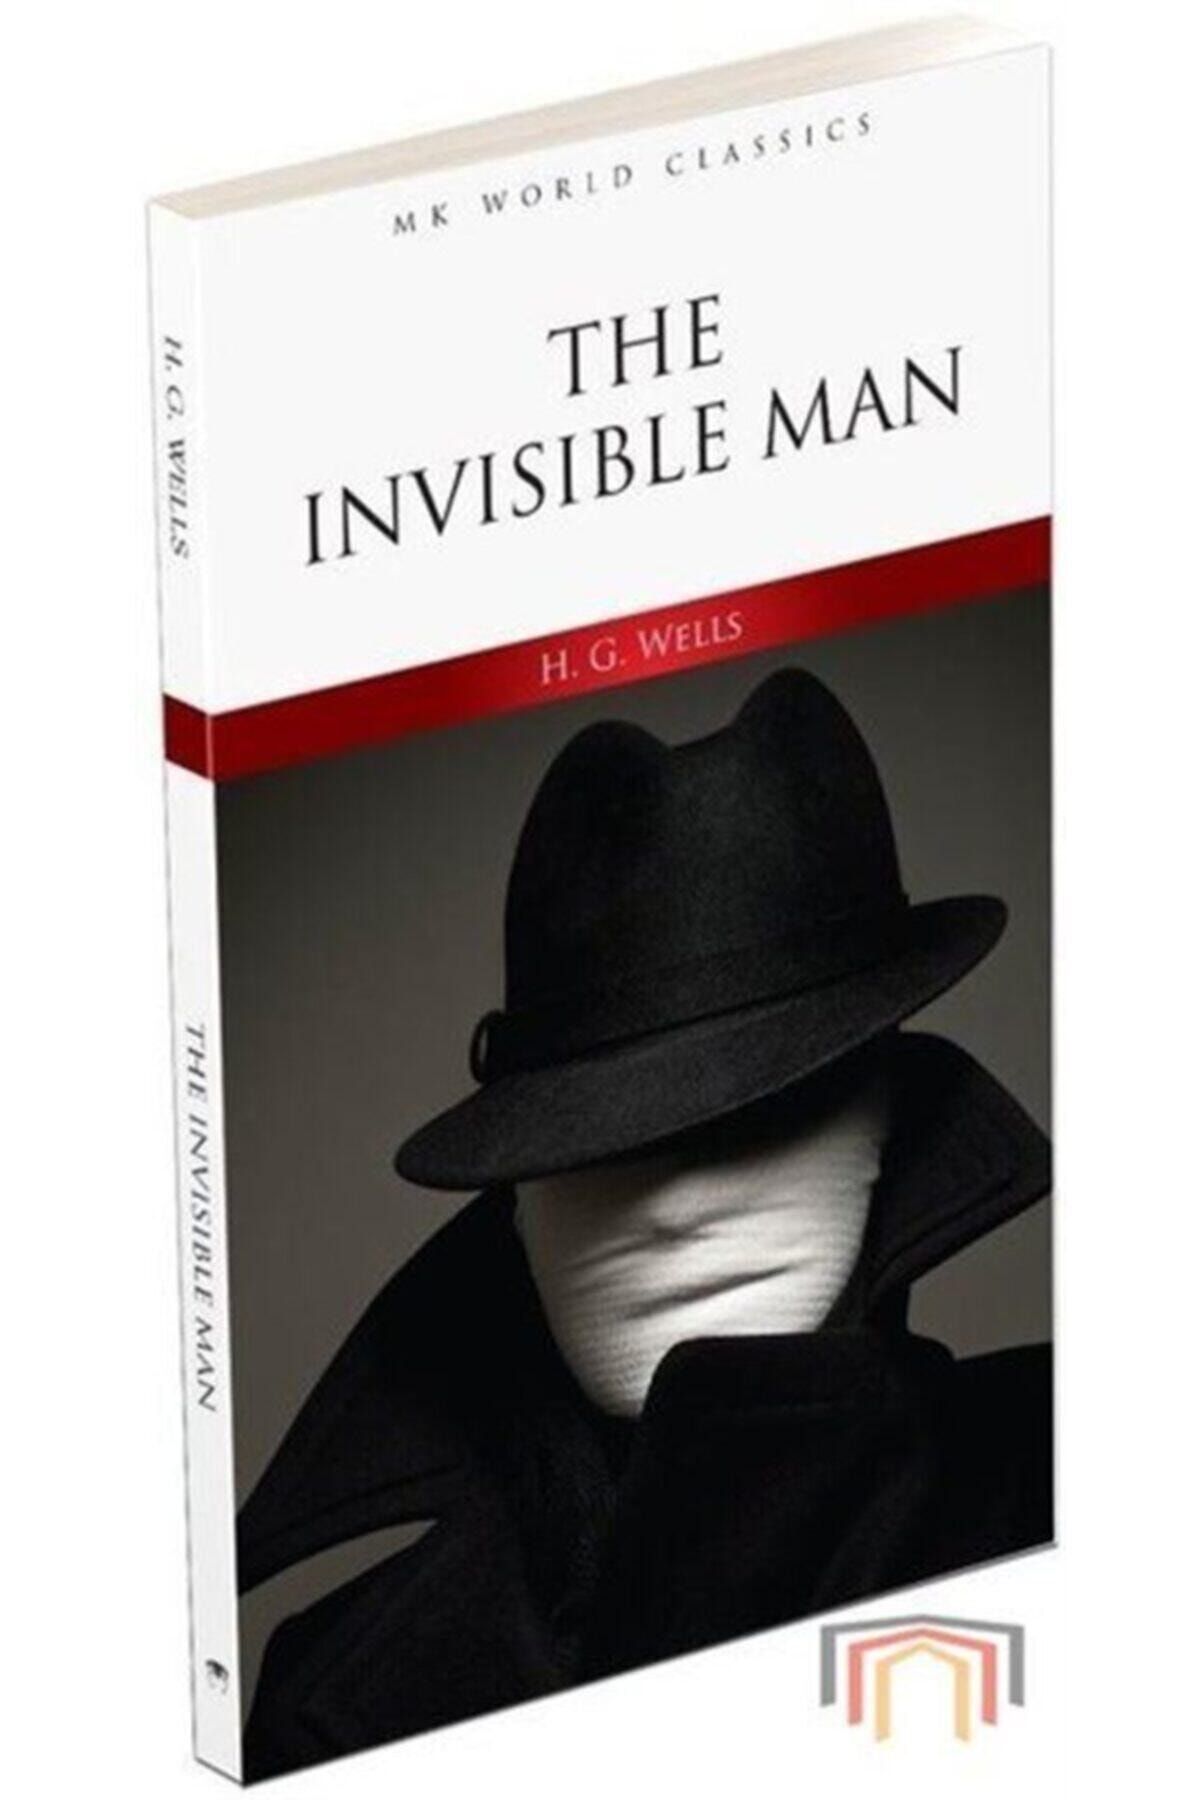 MK Publications - Roman The Invisible Man - H. G. Wells